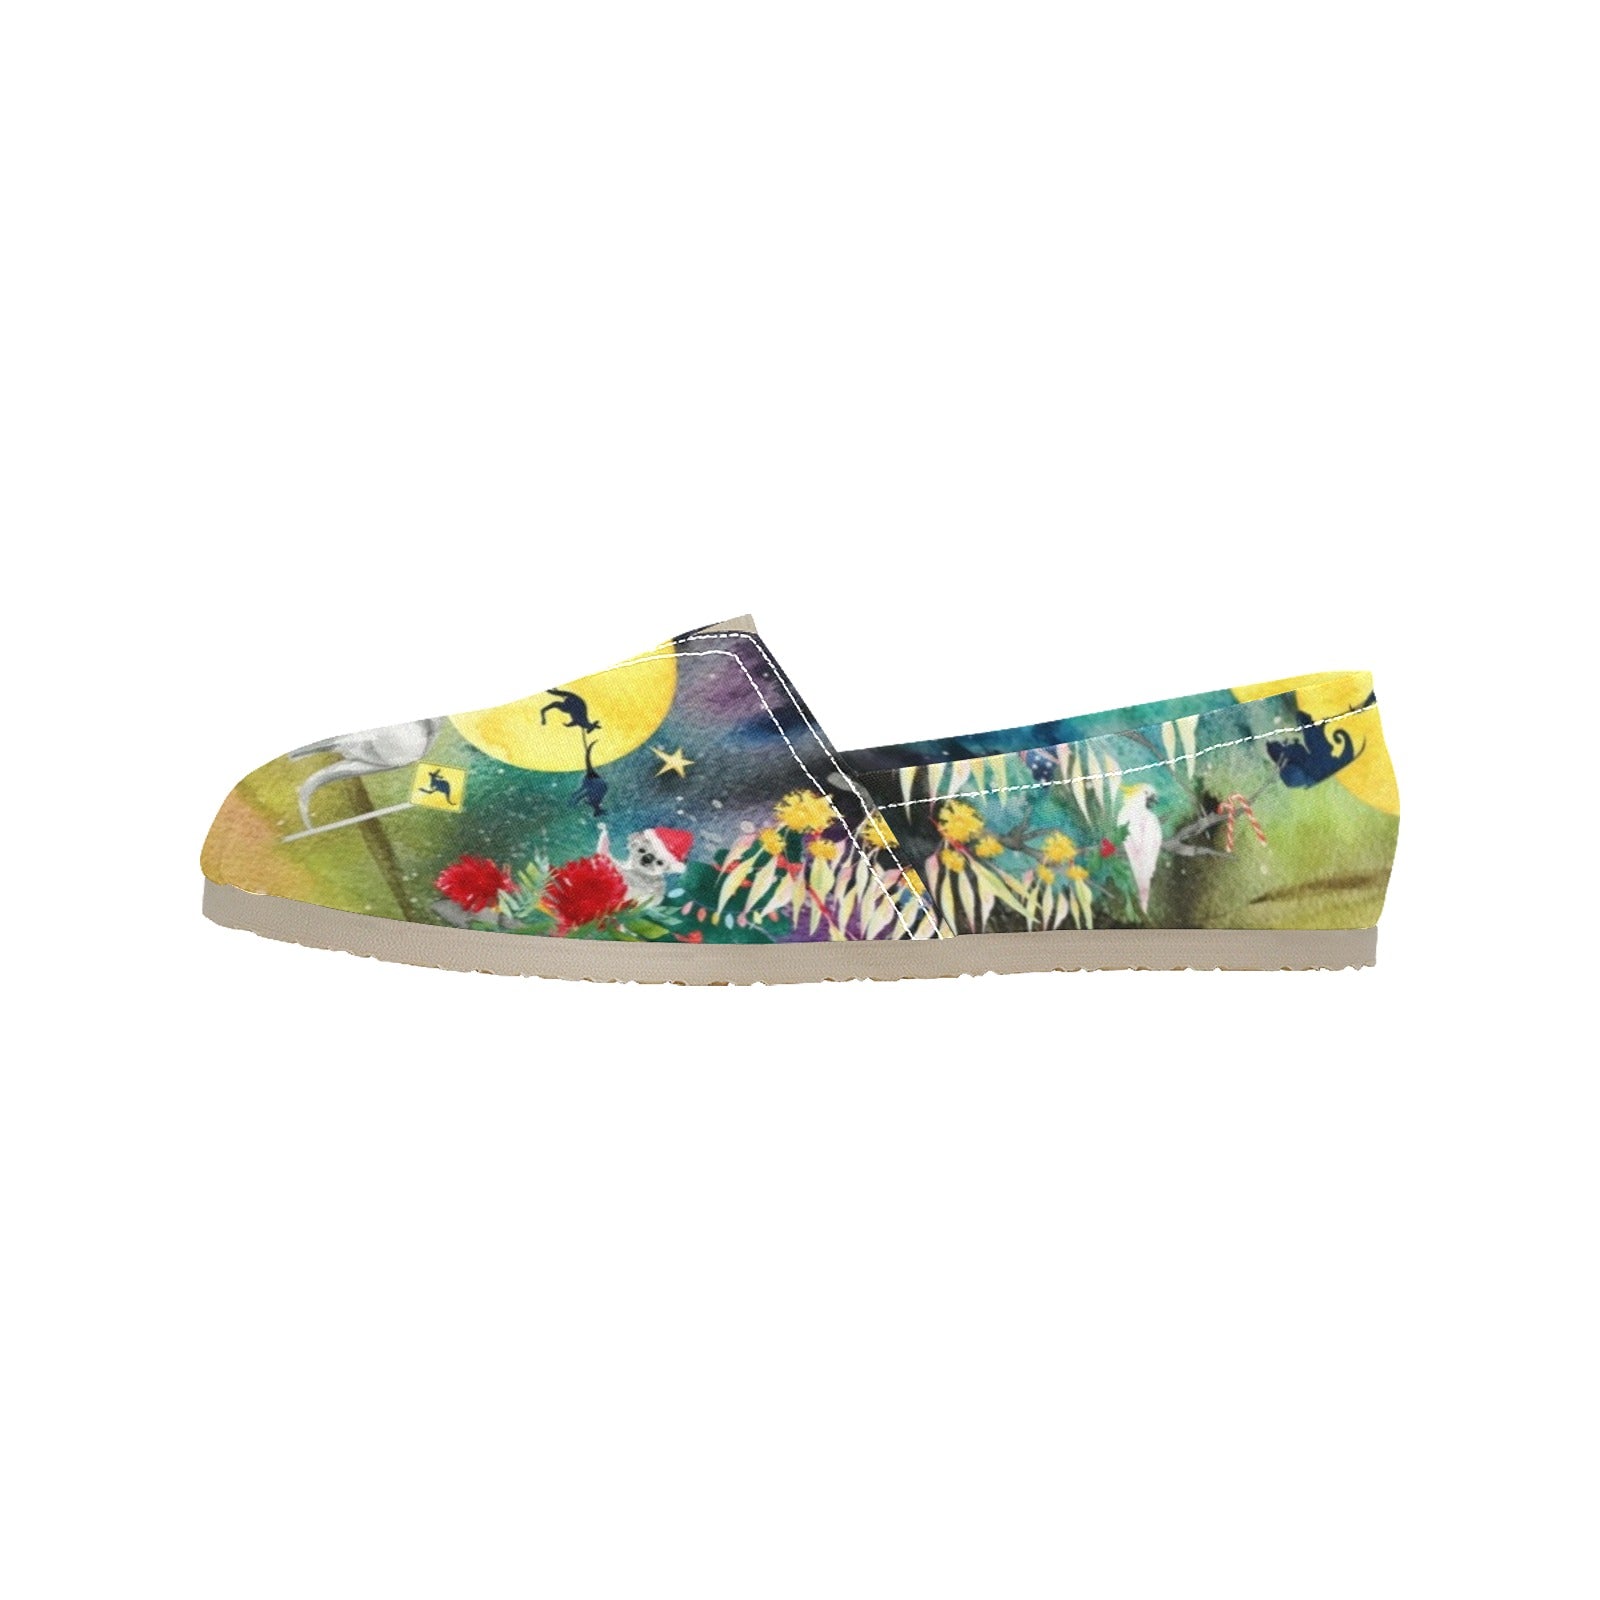 Xmas Aussie - Casual Canvas Slip-on Shoes